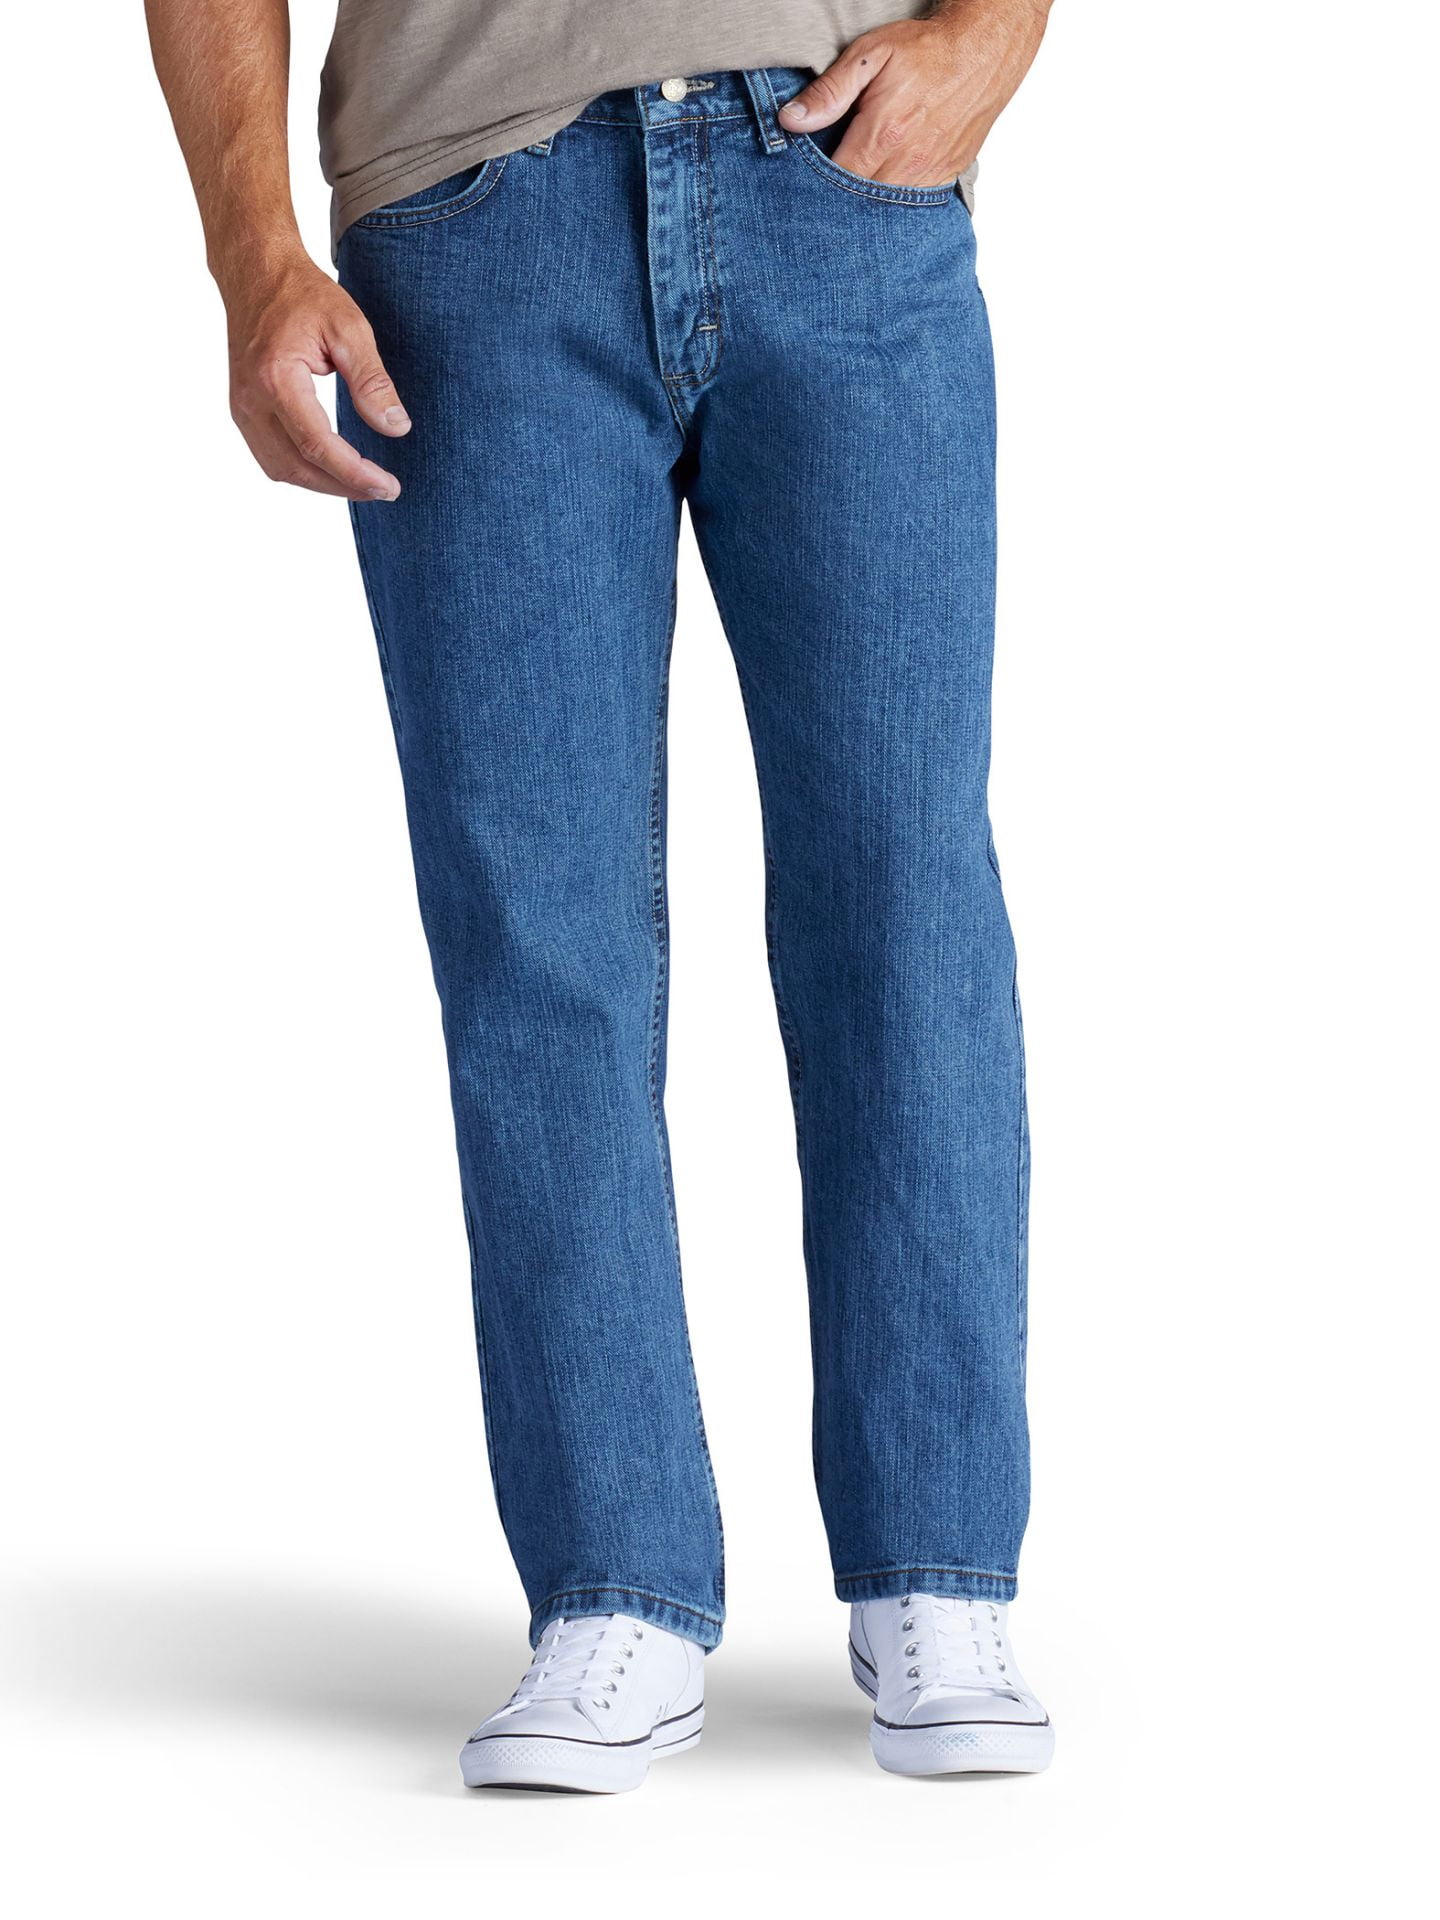 Lee - Lee Men's Relaxed Fit Straight Leg Jeans - Newman, Newman, 35X30 ...